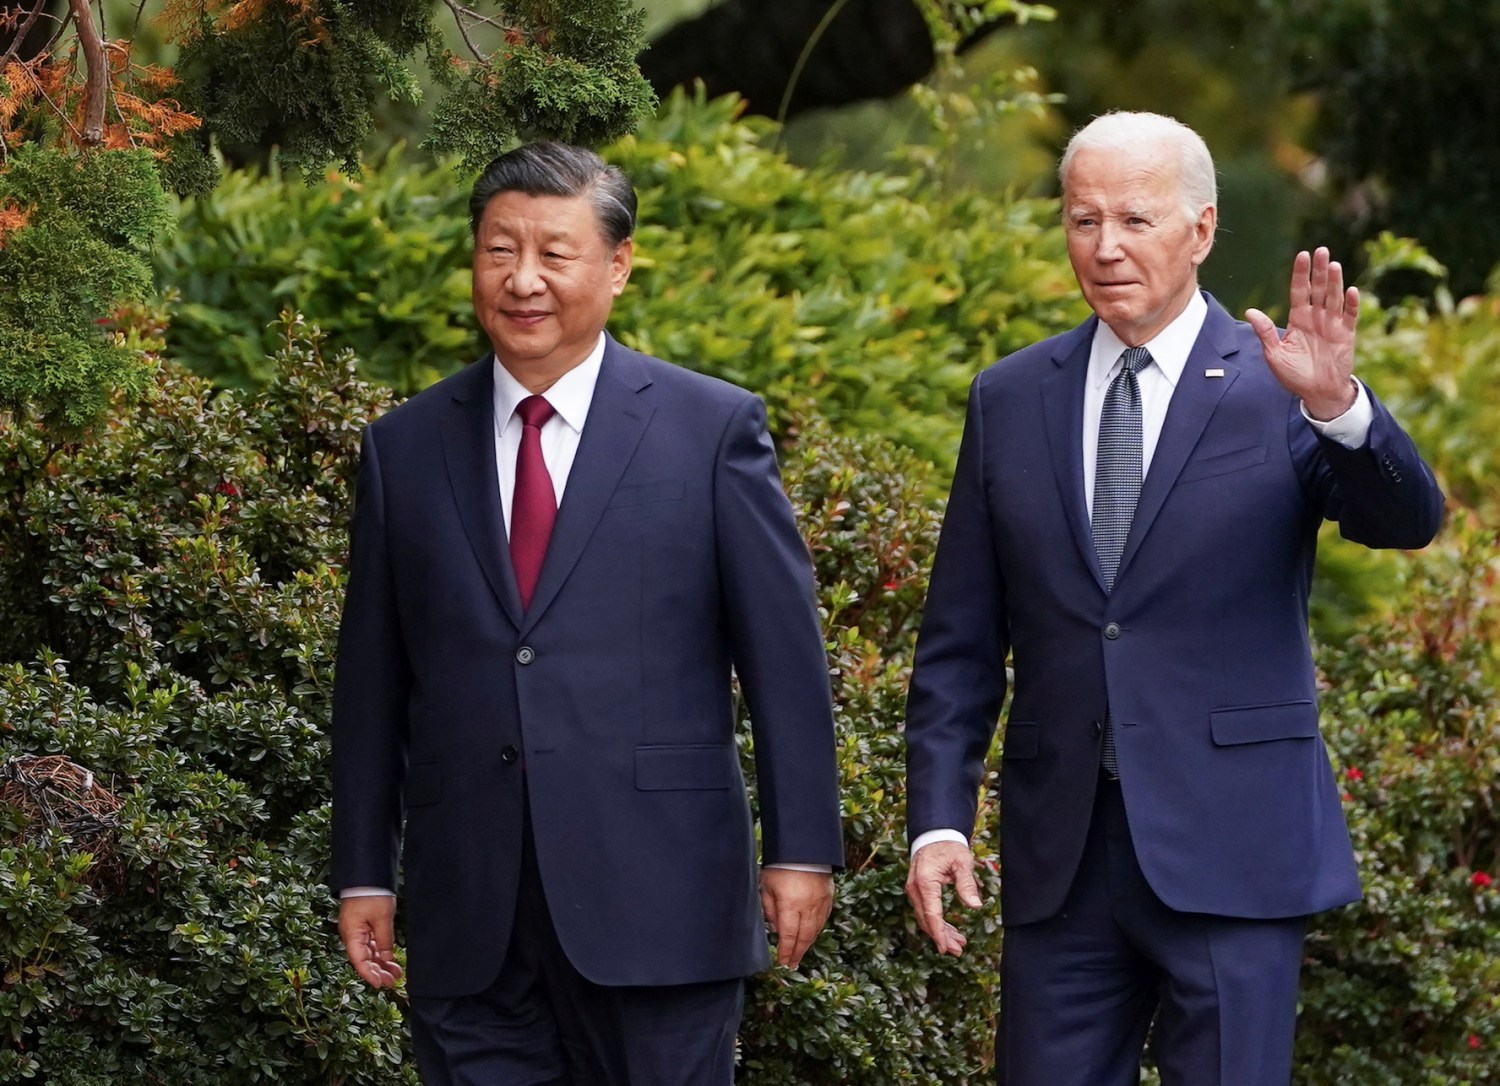 U.S. President Joe Biden waves as he walks with Chinese President Xi Jinping at Filoli estate on the sidelines of the Asia-Pacific Economic Cooperation (APEC) summit, in Woodside, California, U.S., November 15, 2023.